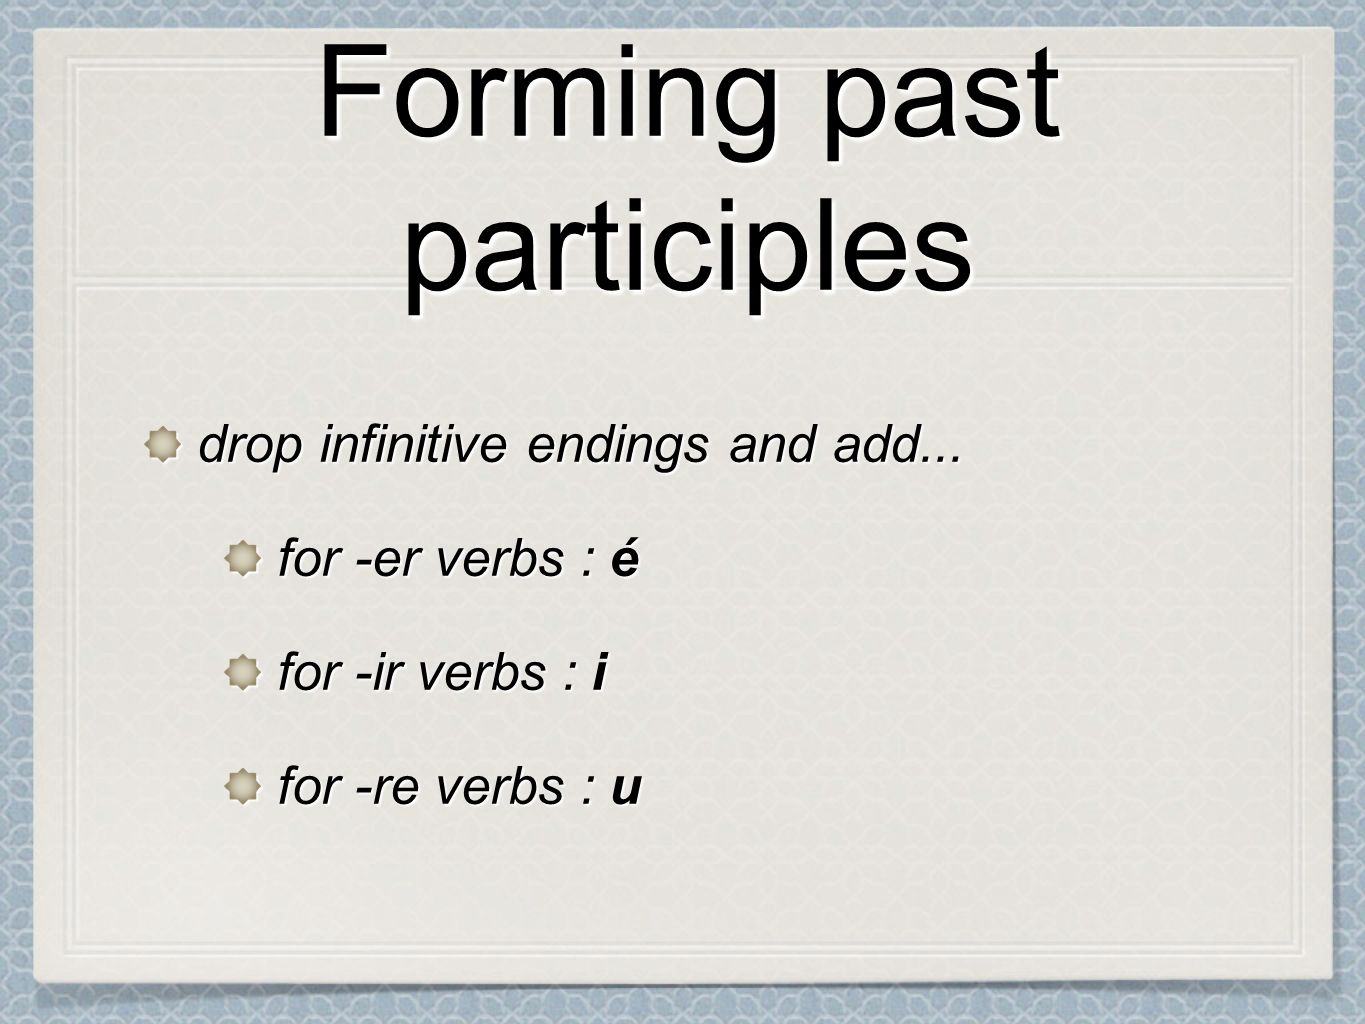 Forming past participles drop infinitive endings and add...